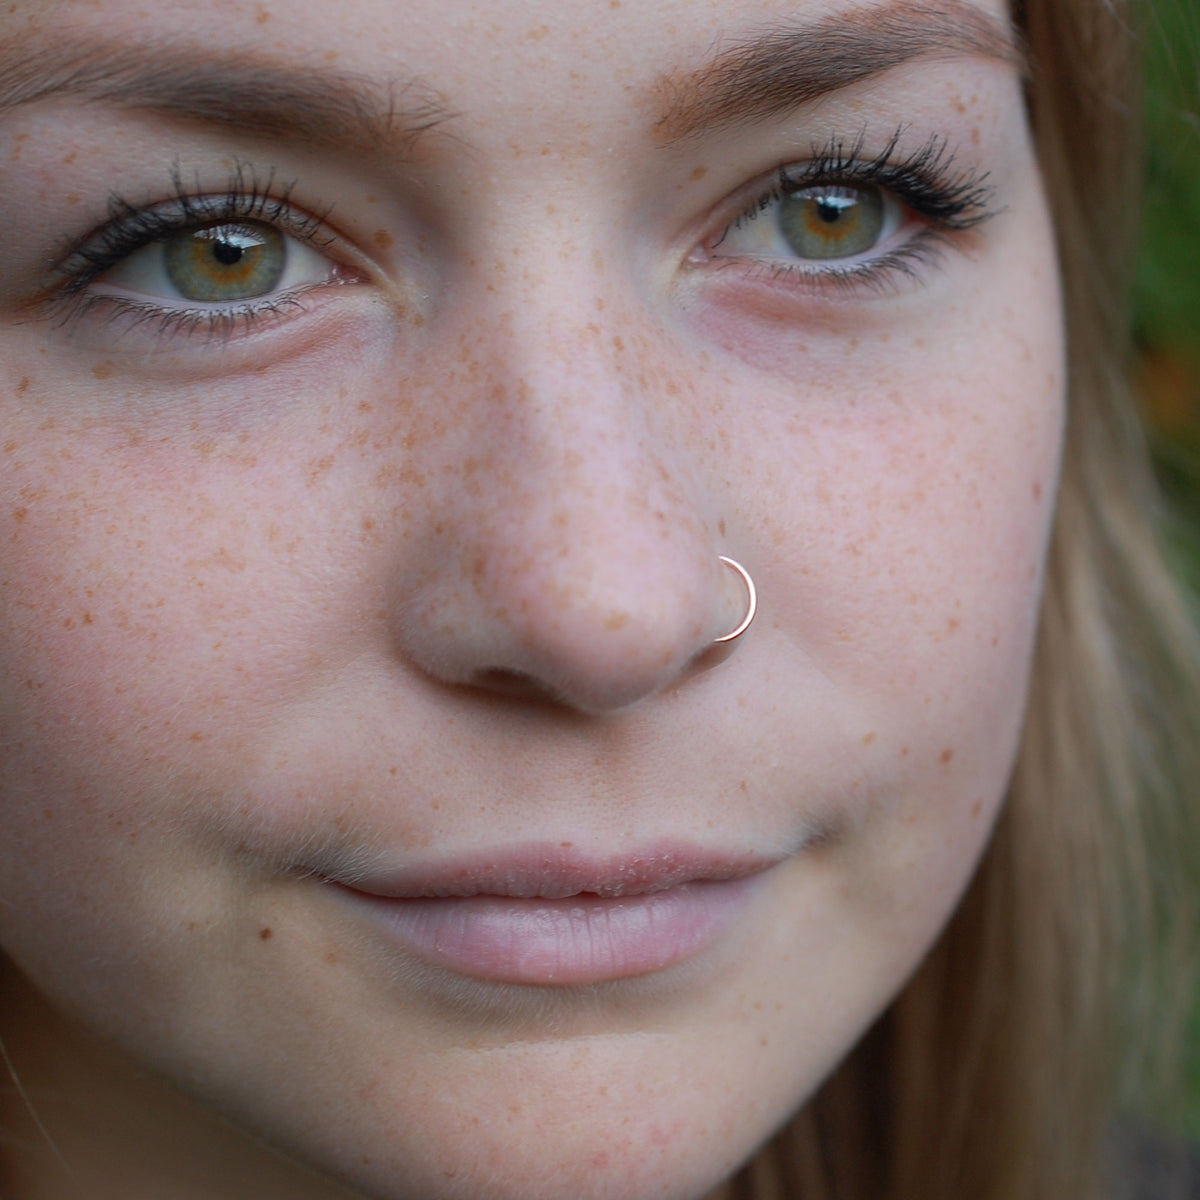 What Nose Ring Is Best? A Guide For What Nose Ring To Get